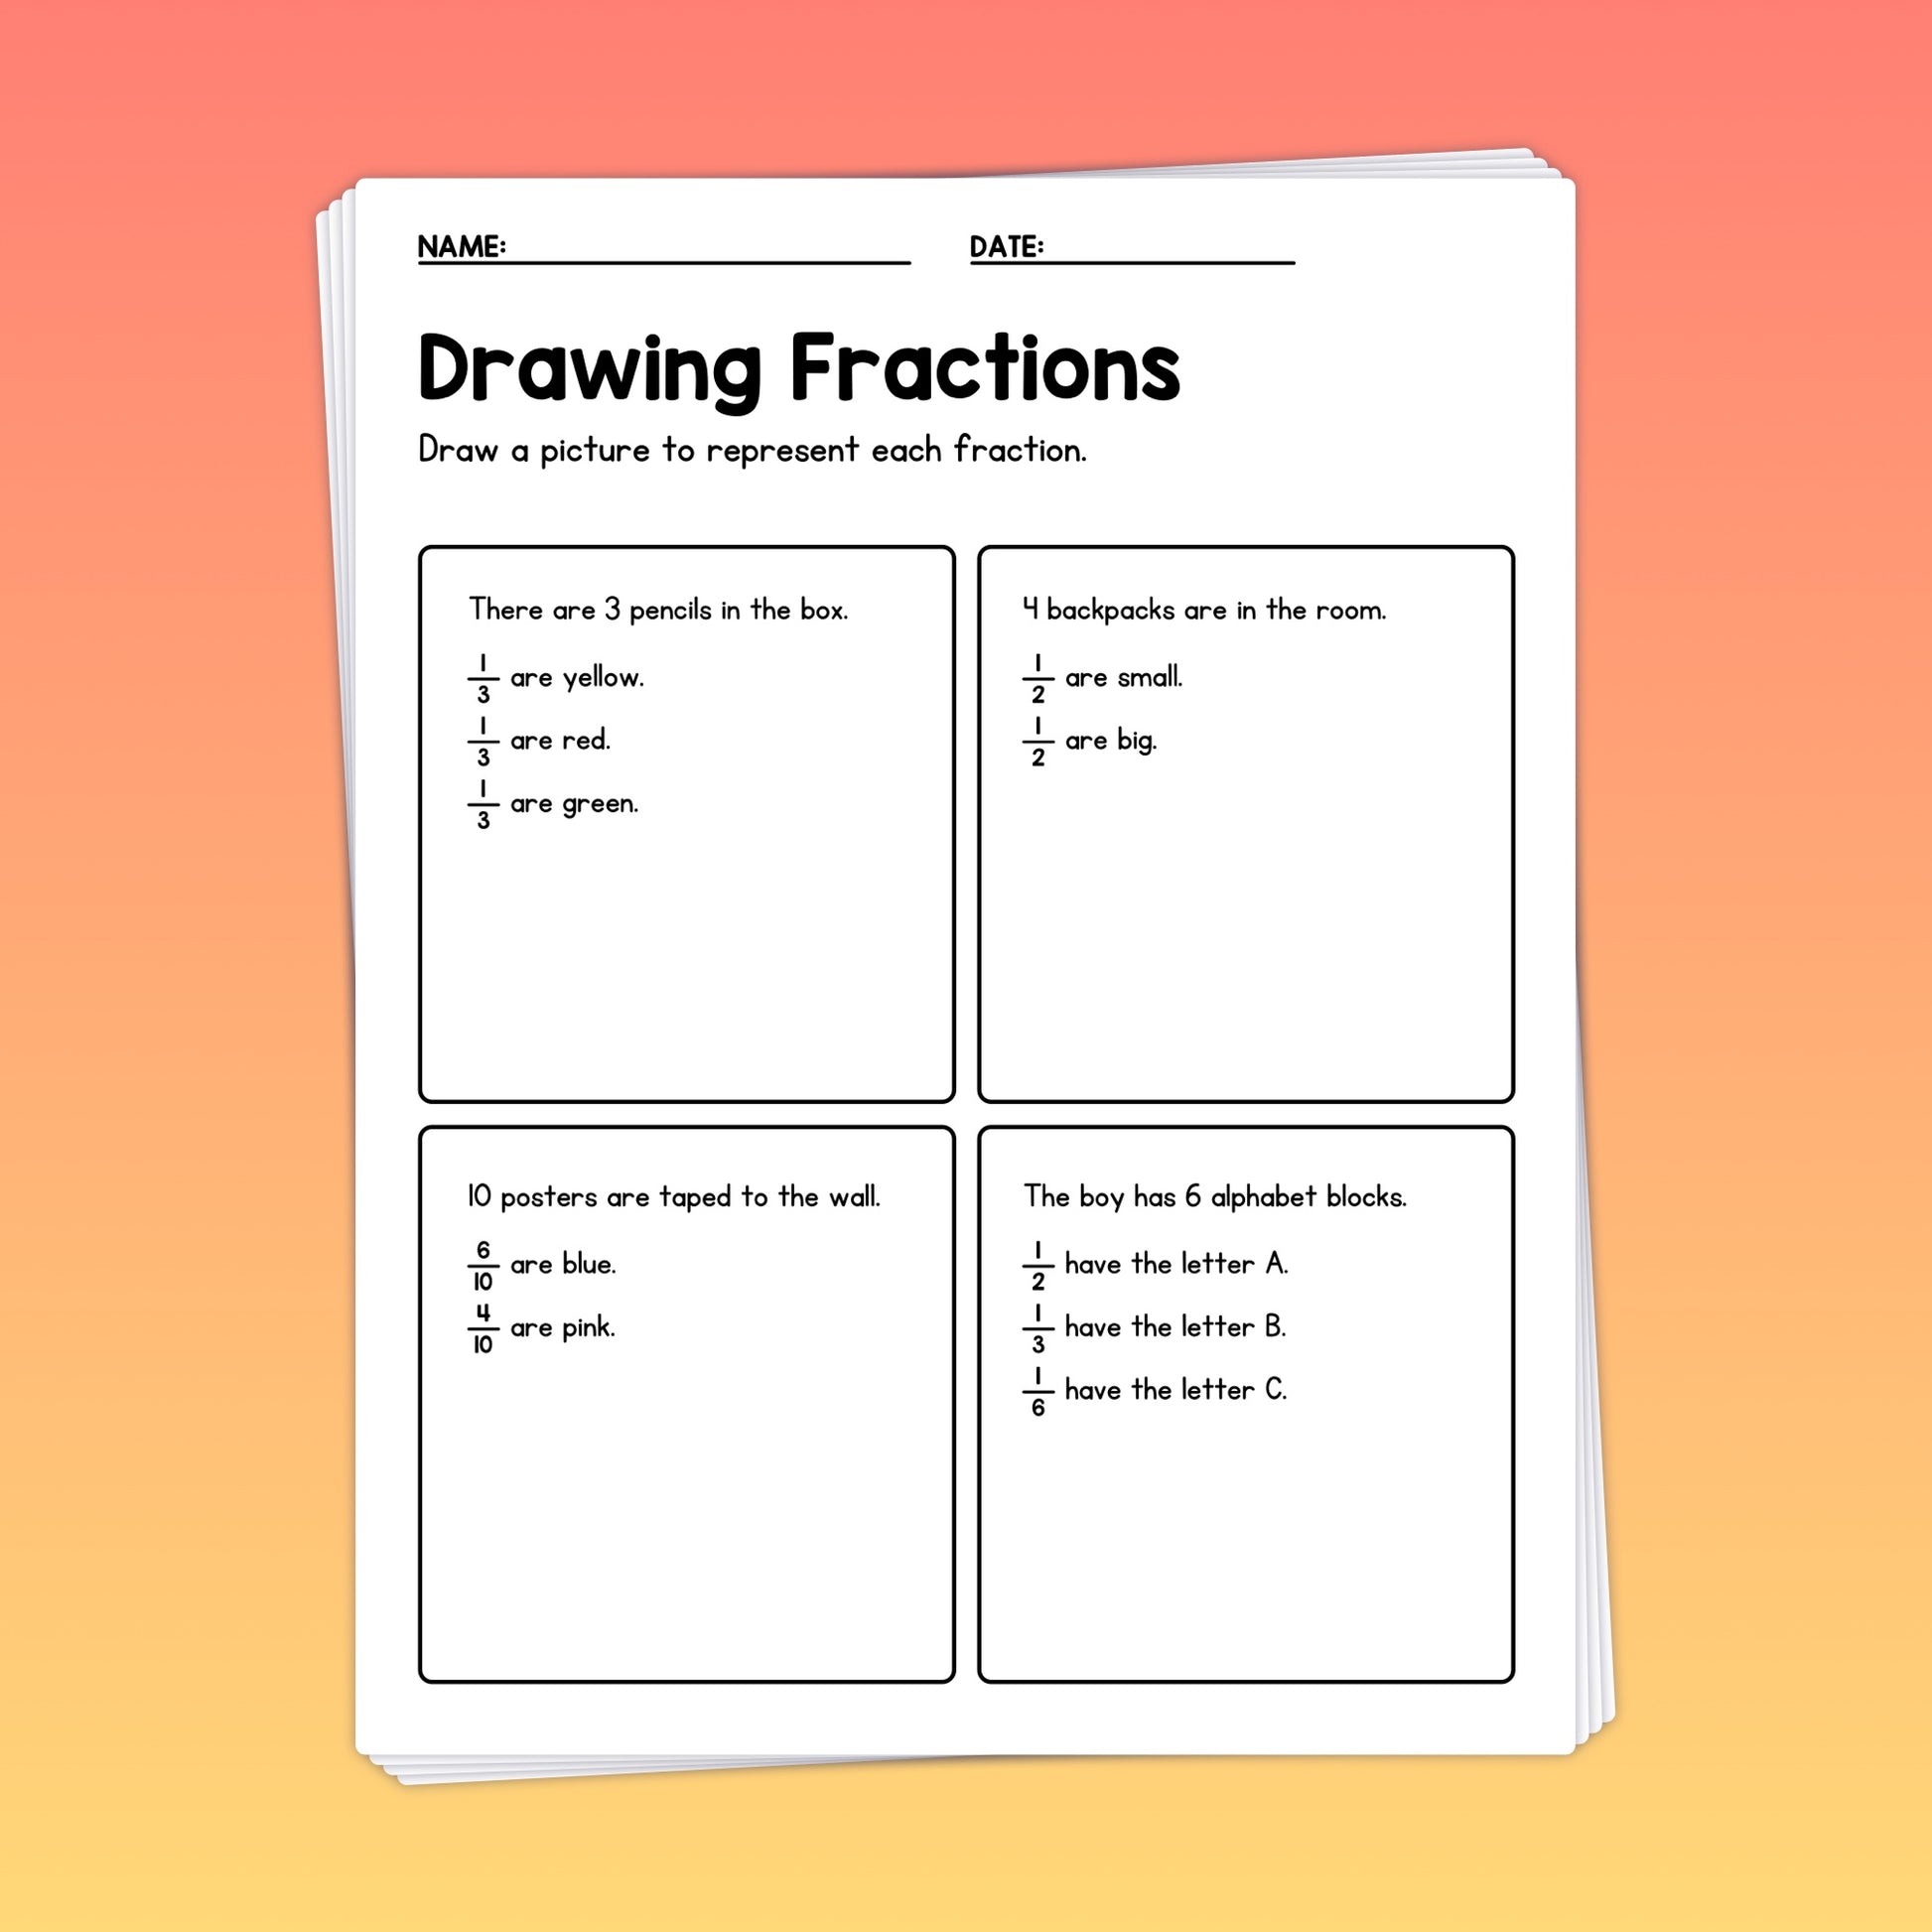 Drawing fractions printable